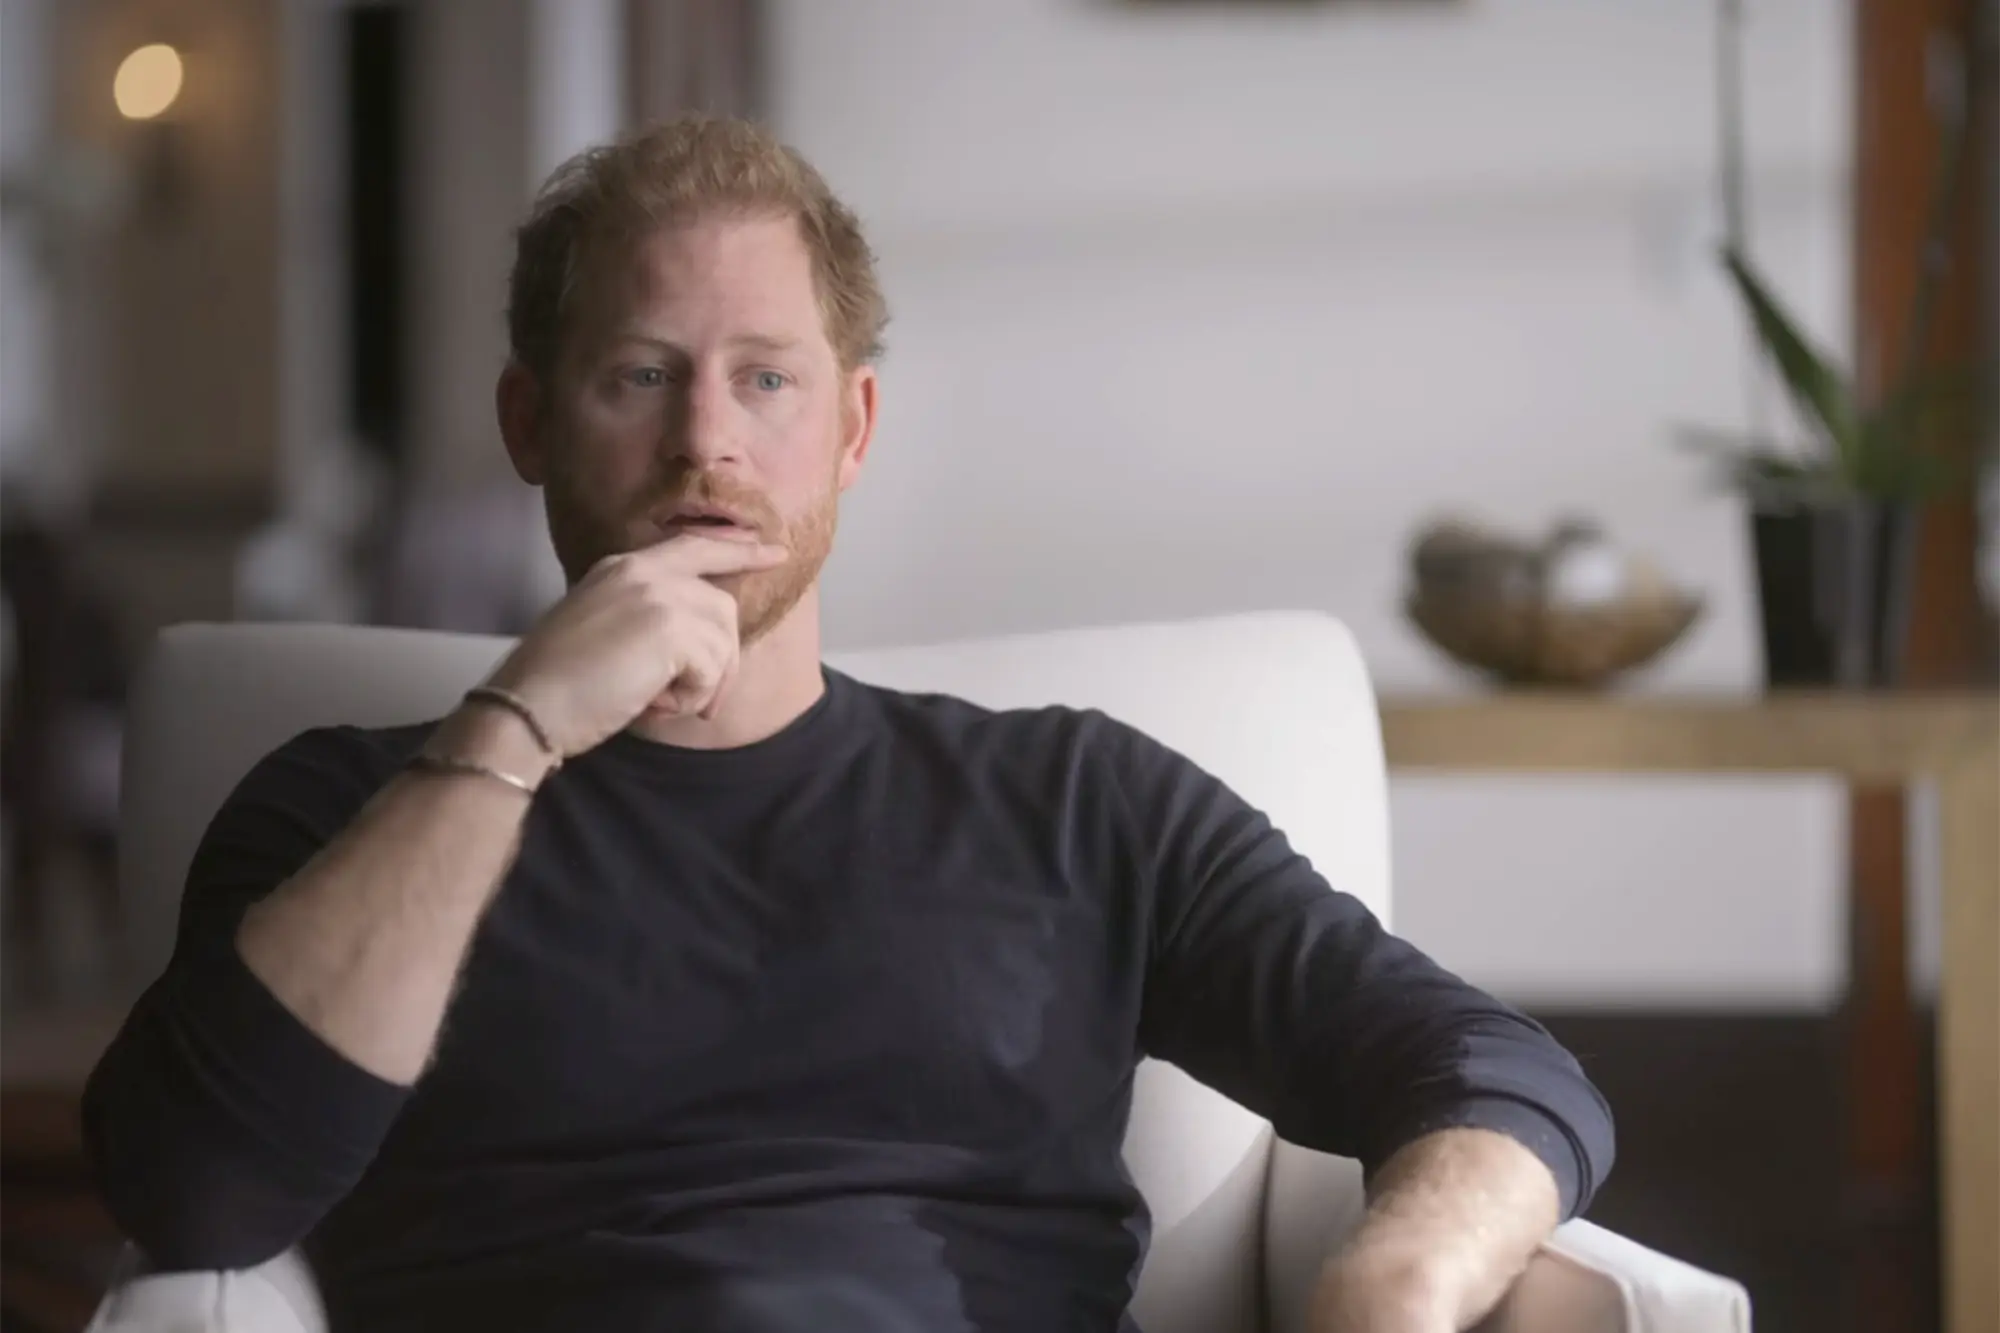 “She was tricked into giving an interview,” Prince Harry says of his late mother.